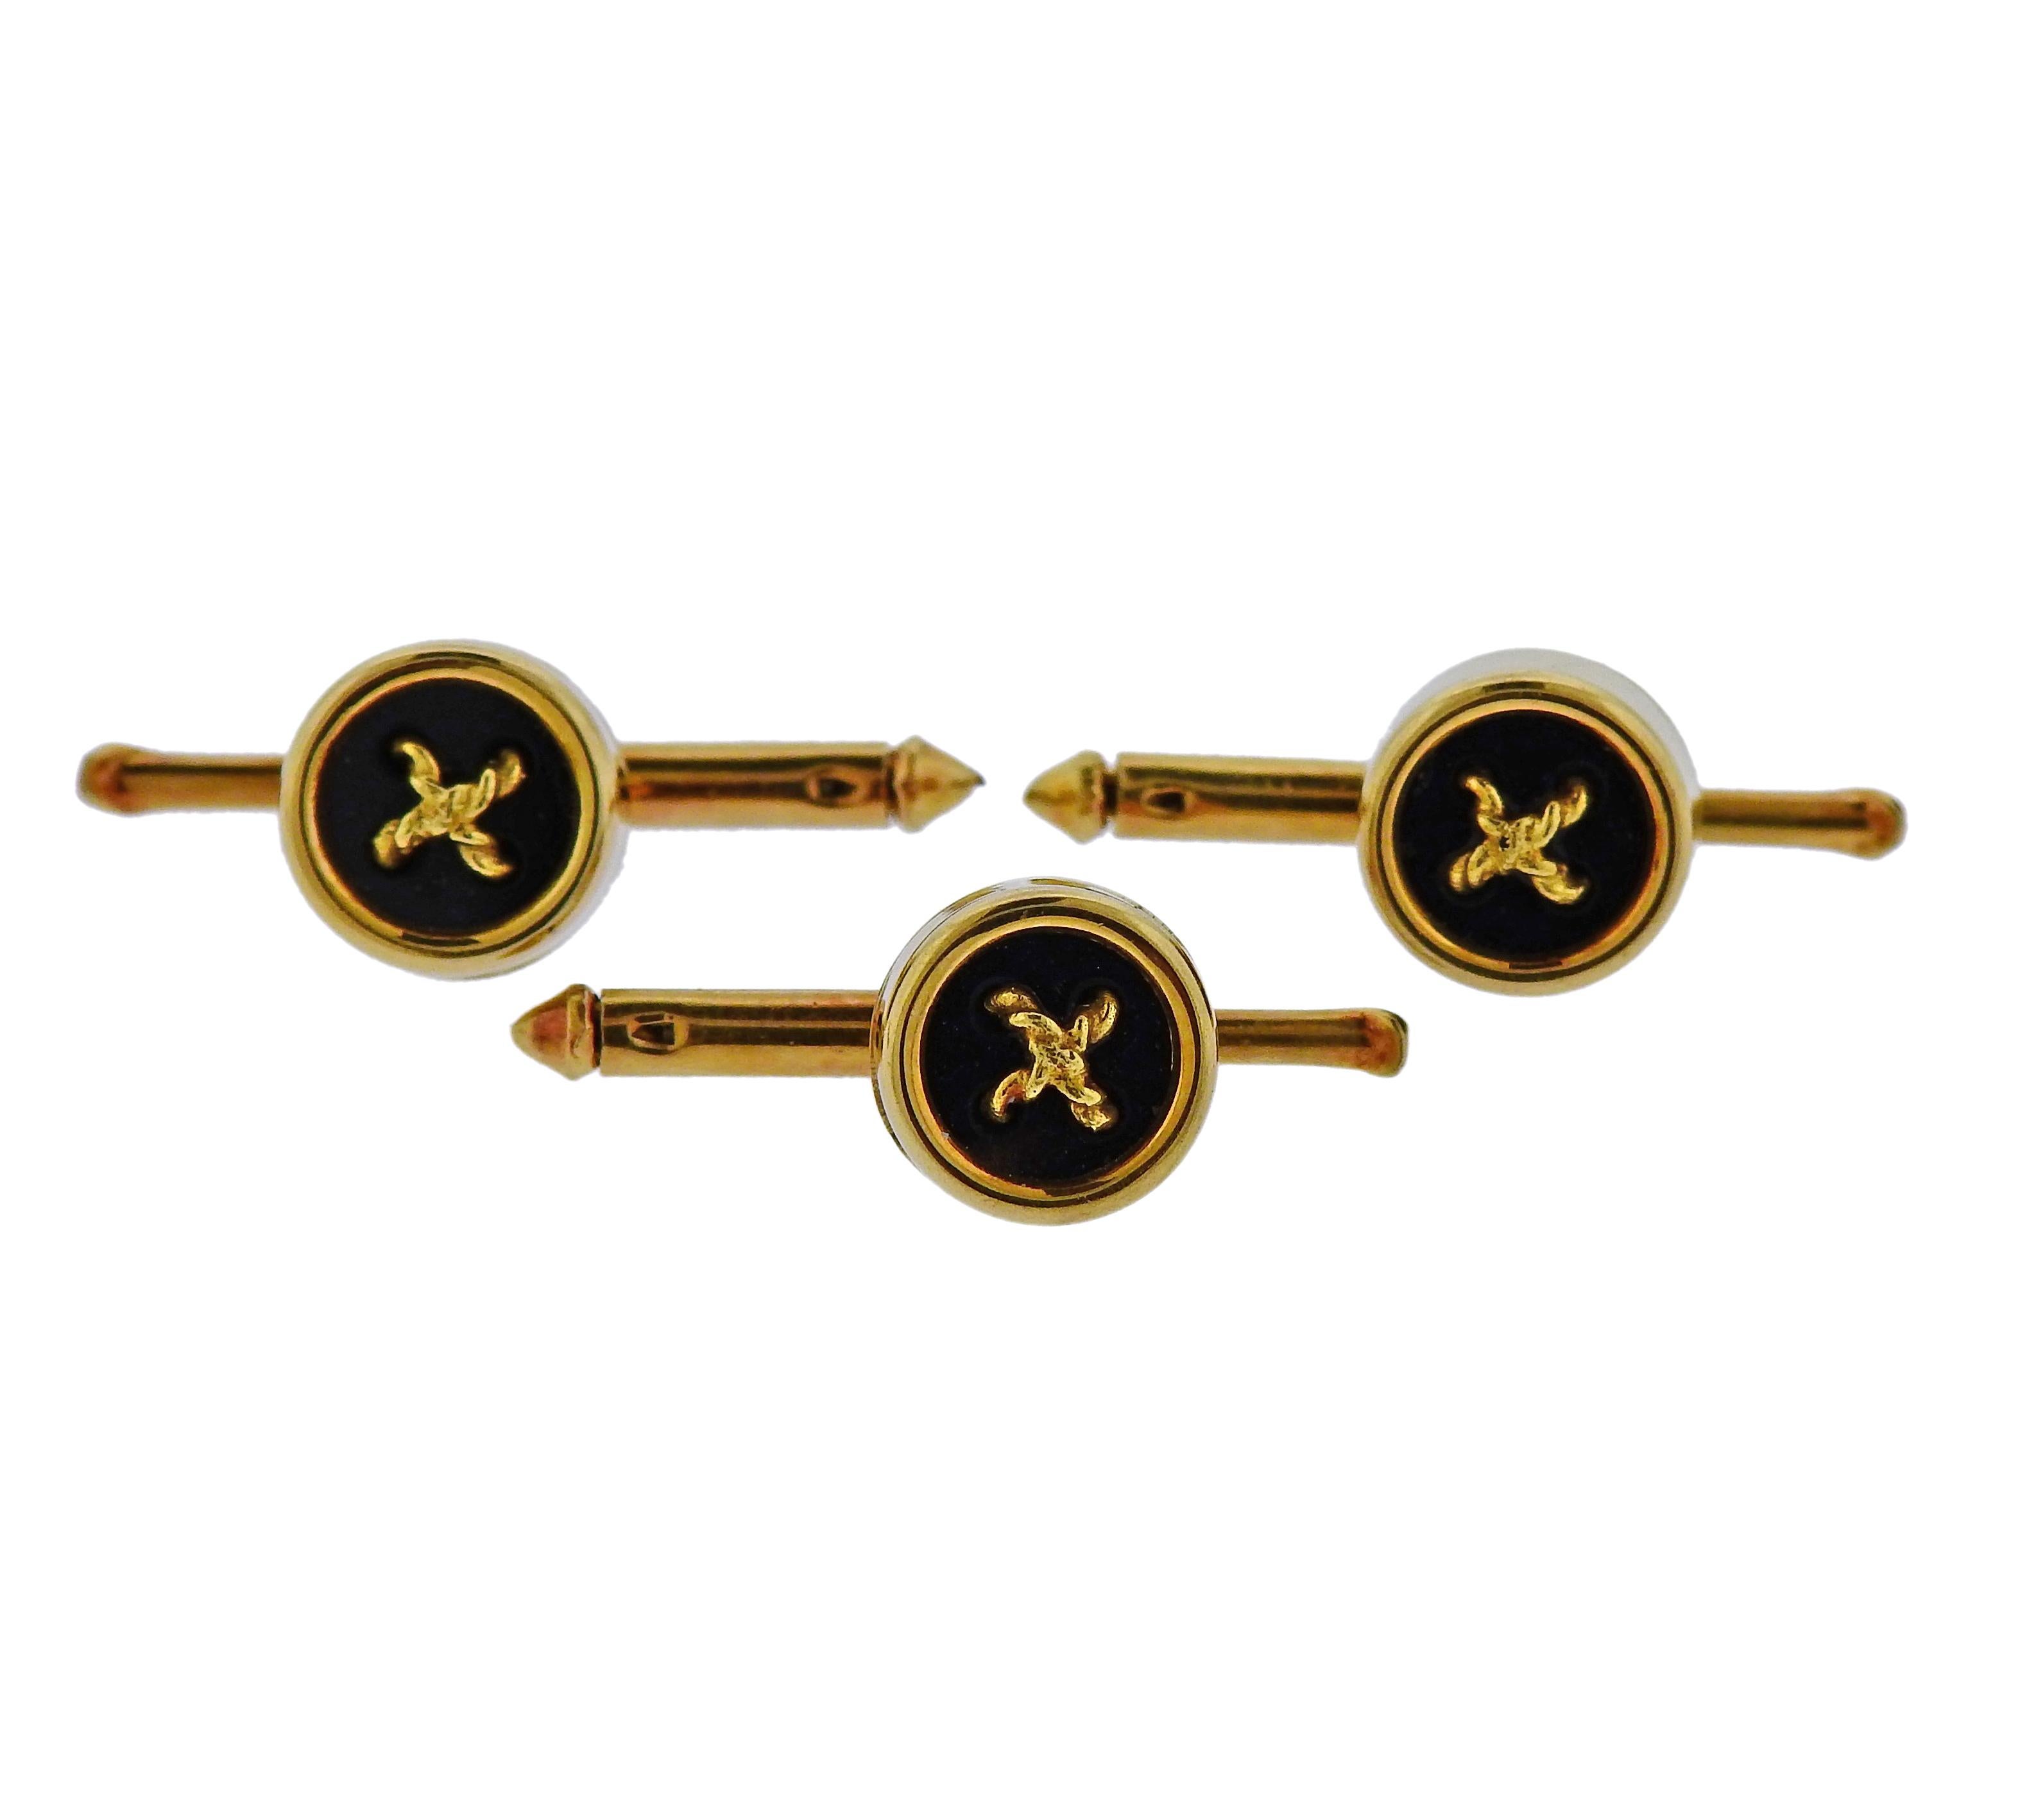 18k yellow gold cufflinks and studs button set , crafted by Tiffany & Co, set with onyx. Cufflink top i 15mm in diameter, stud - 10mm, total weight is 18.5 grams. Marked Tiffany & Co 18k, 